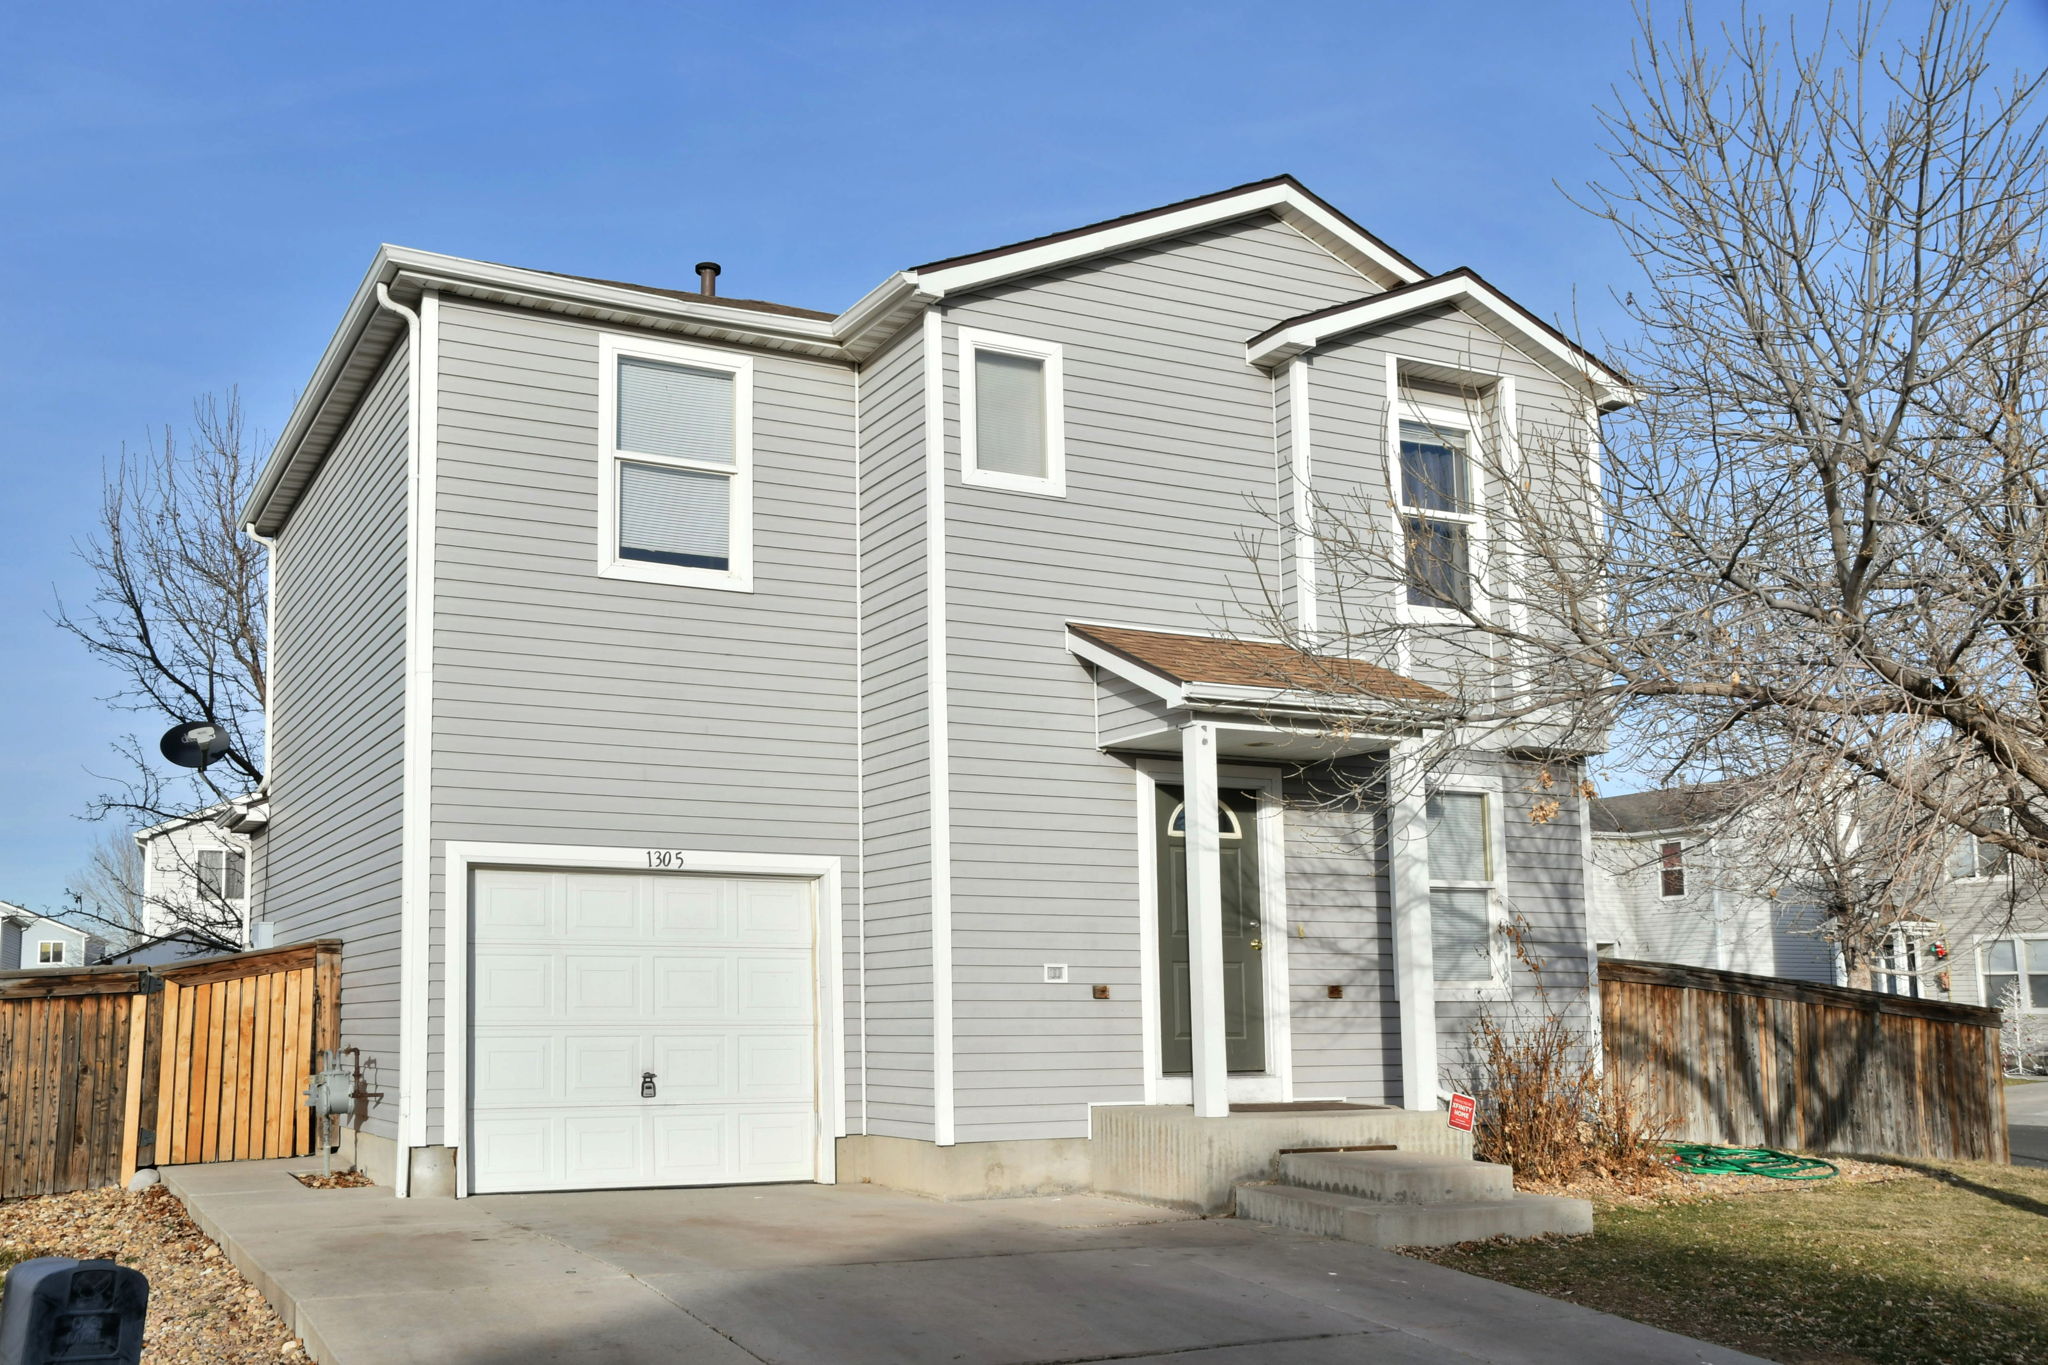  1305 Waxwing Ave, Brighton, CO 80601, US Photo 2